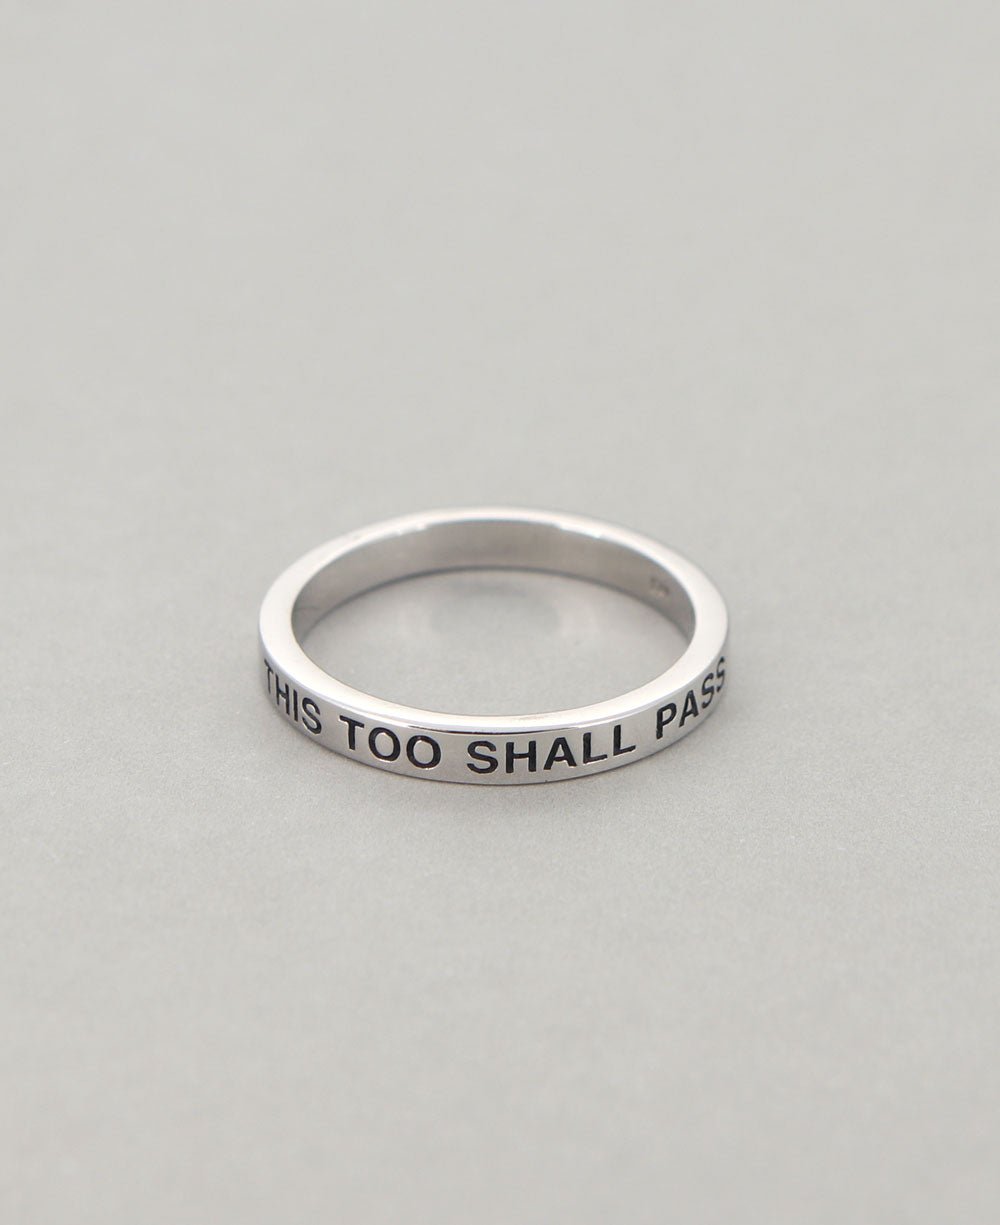 This Too Shall Pass Sterling Silver Bands Ring - Rings Size 6